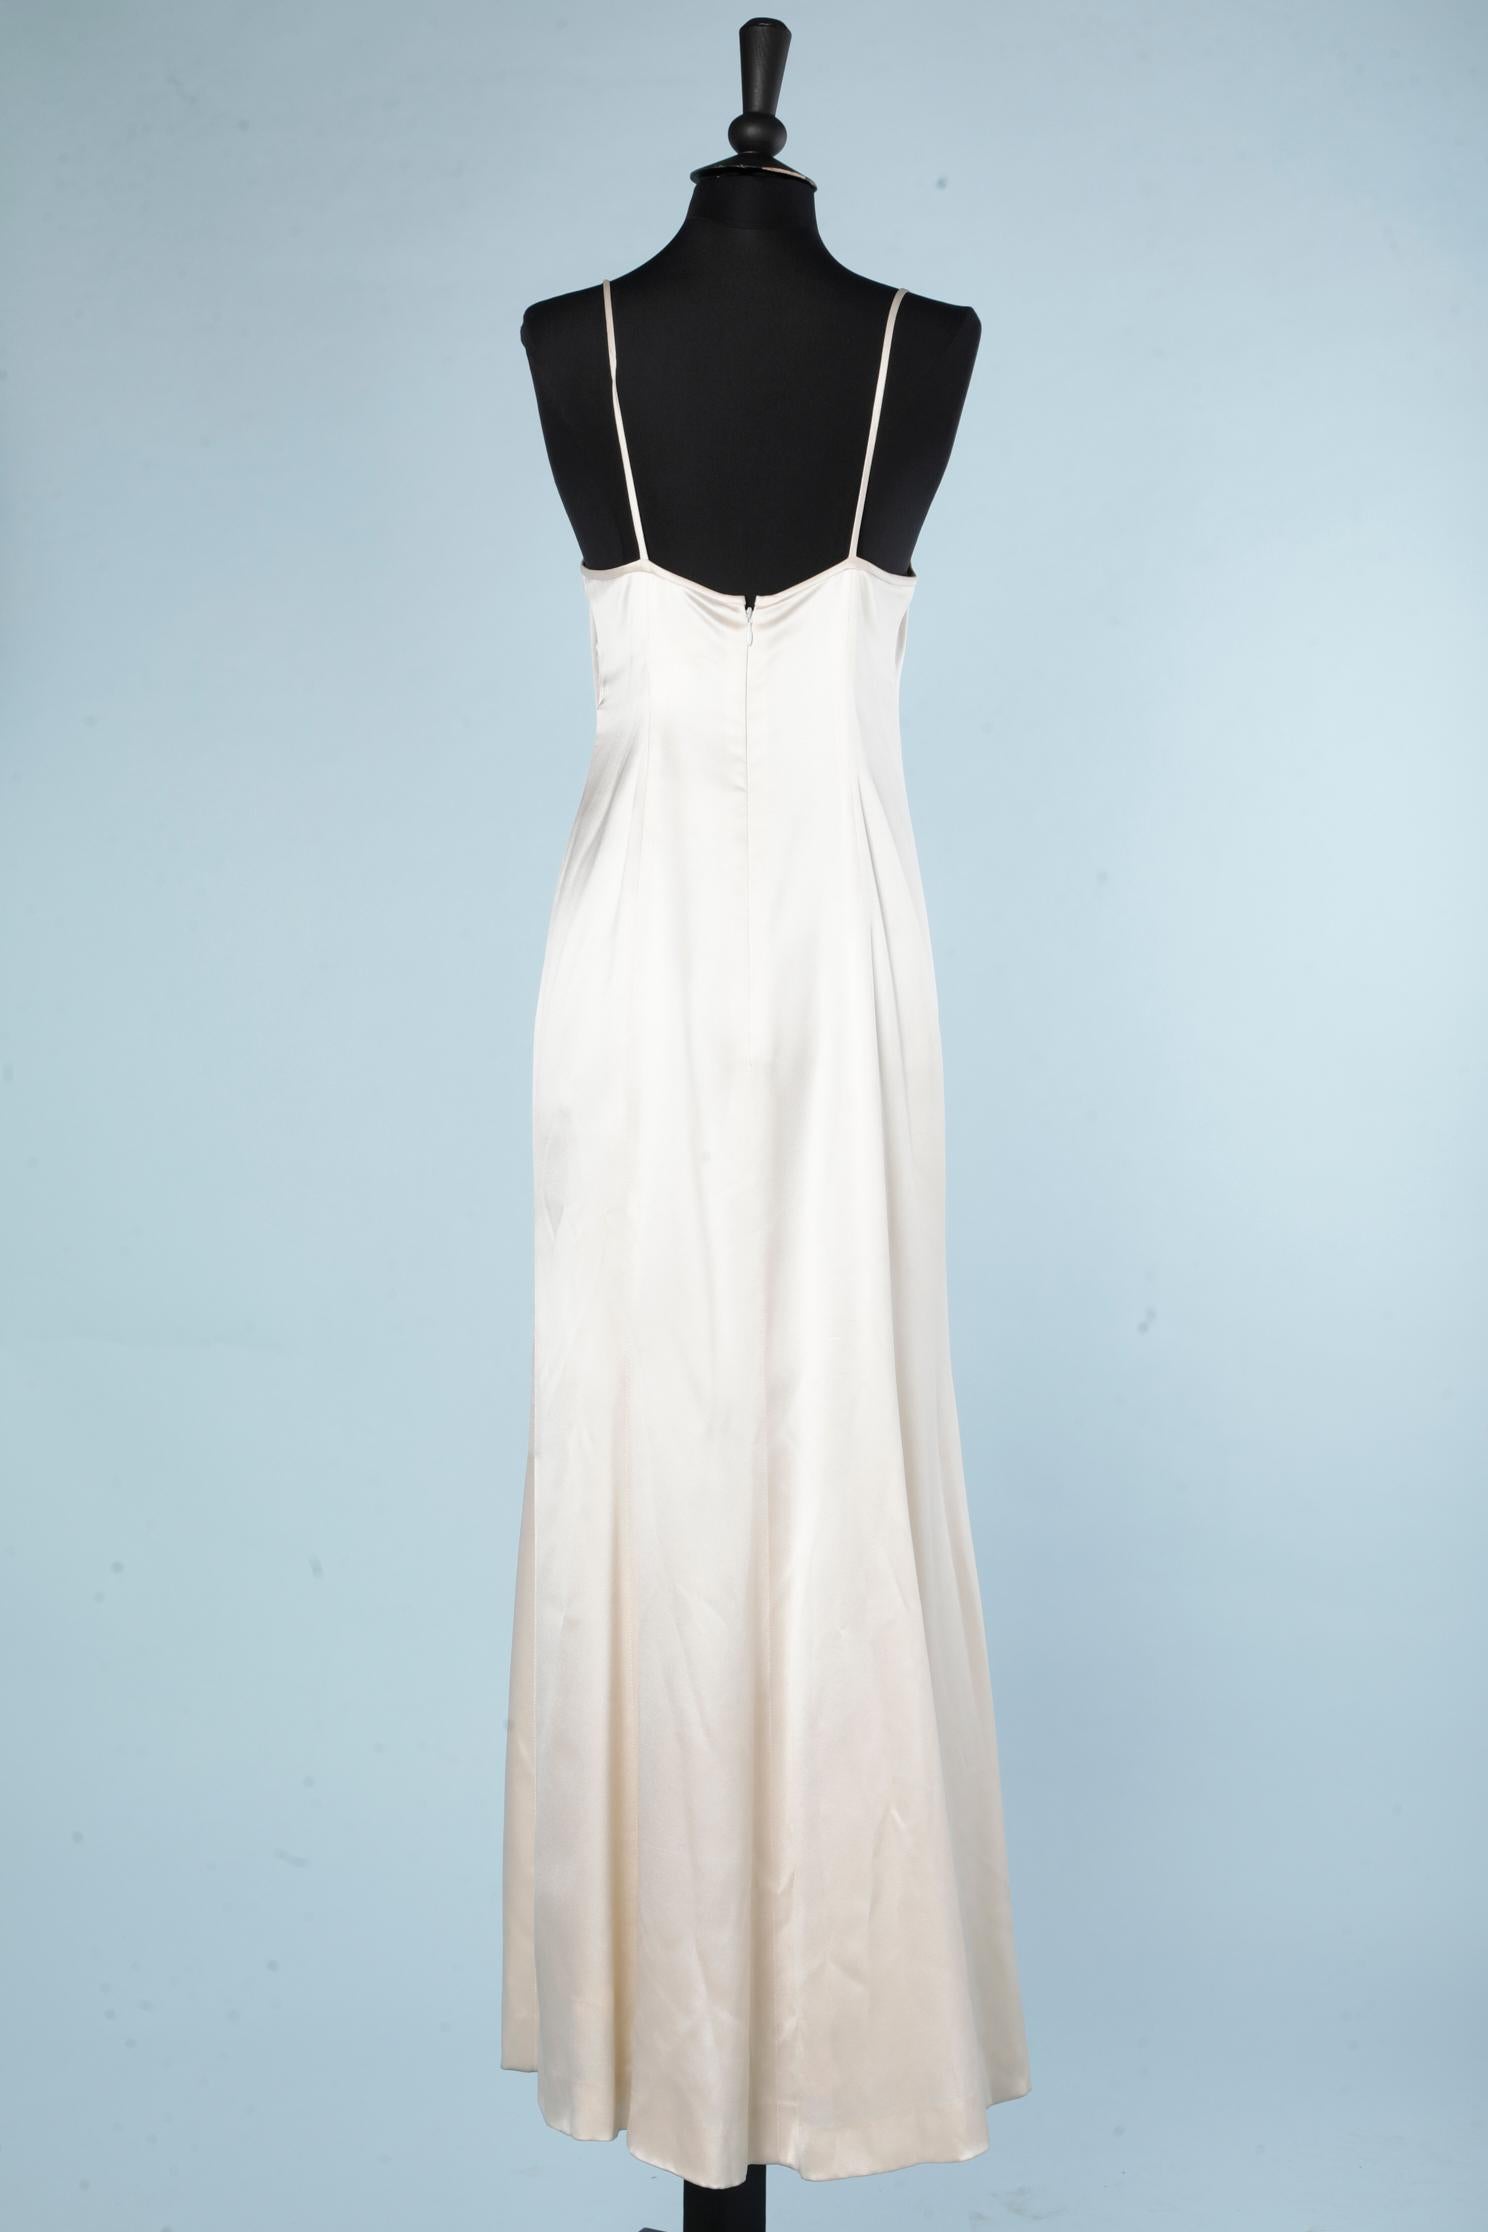 Women's Evening gown ( or wedding dress) in off-white silk Chanel Boutique 